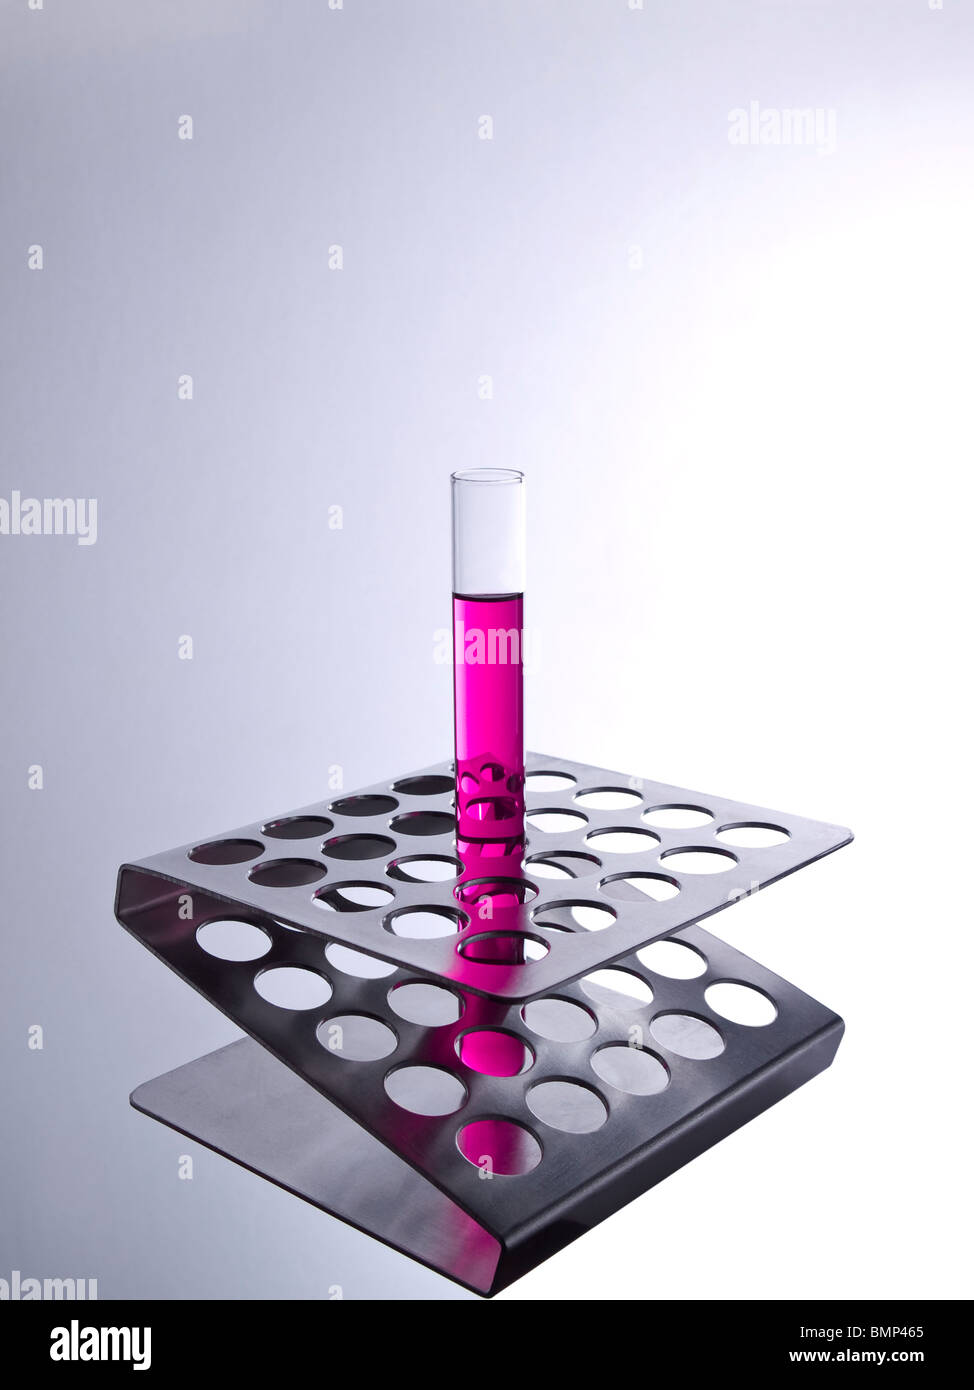 Metal rack with a single test tube filled with a magenta liquid. Stock Photo